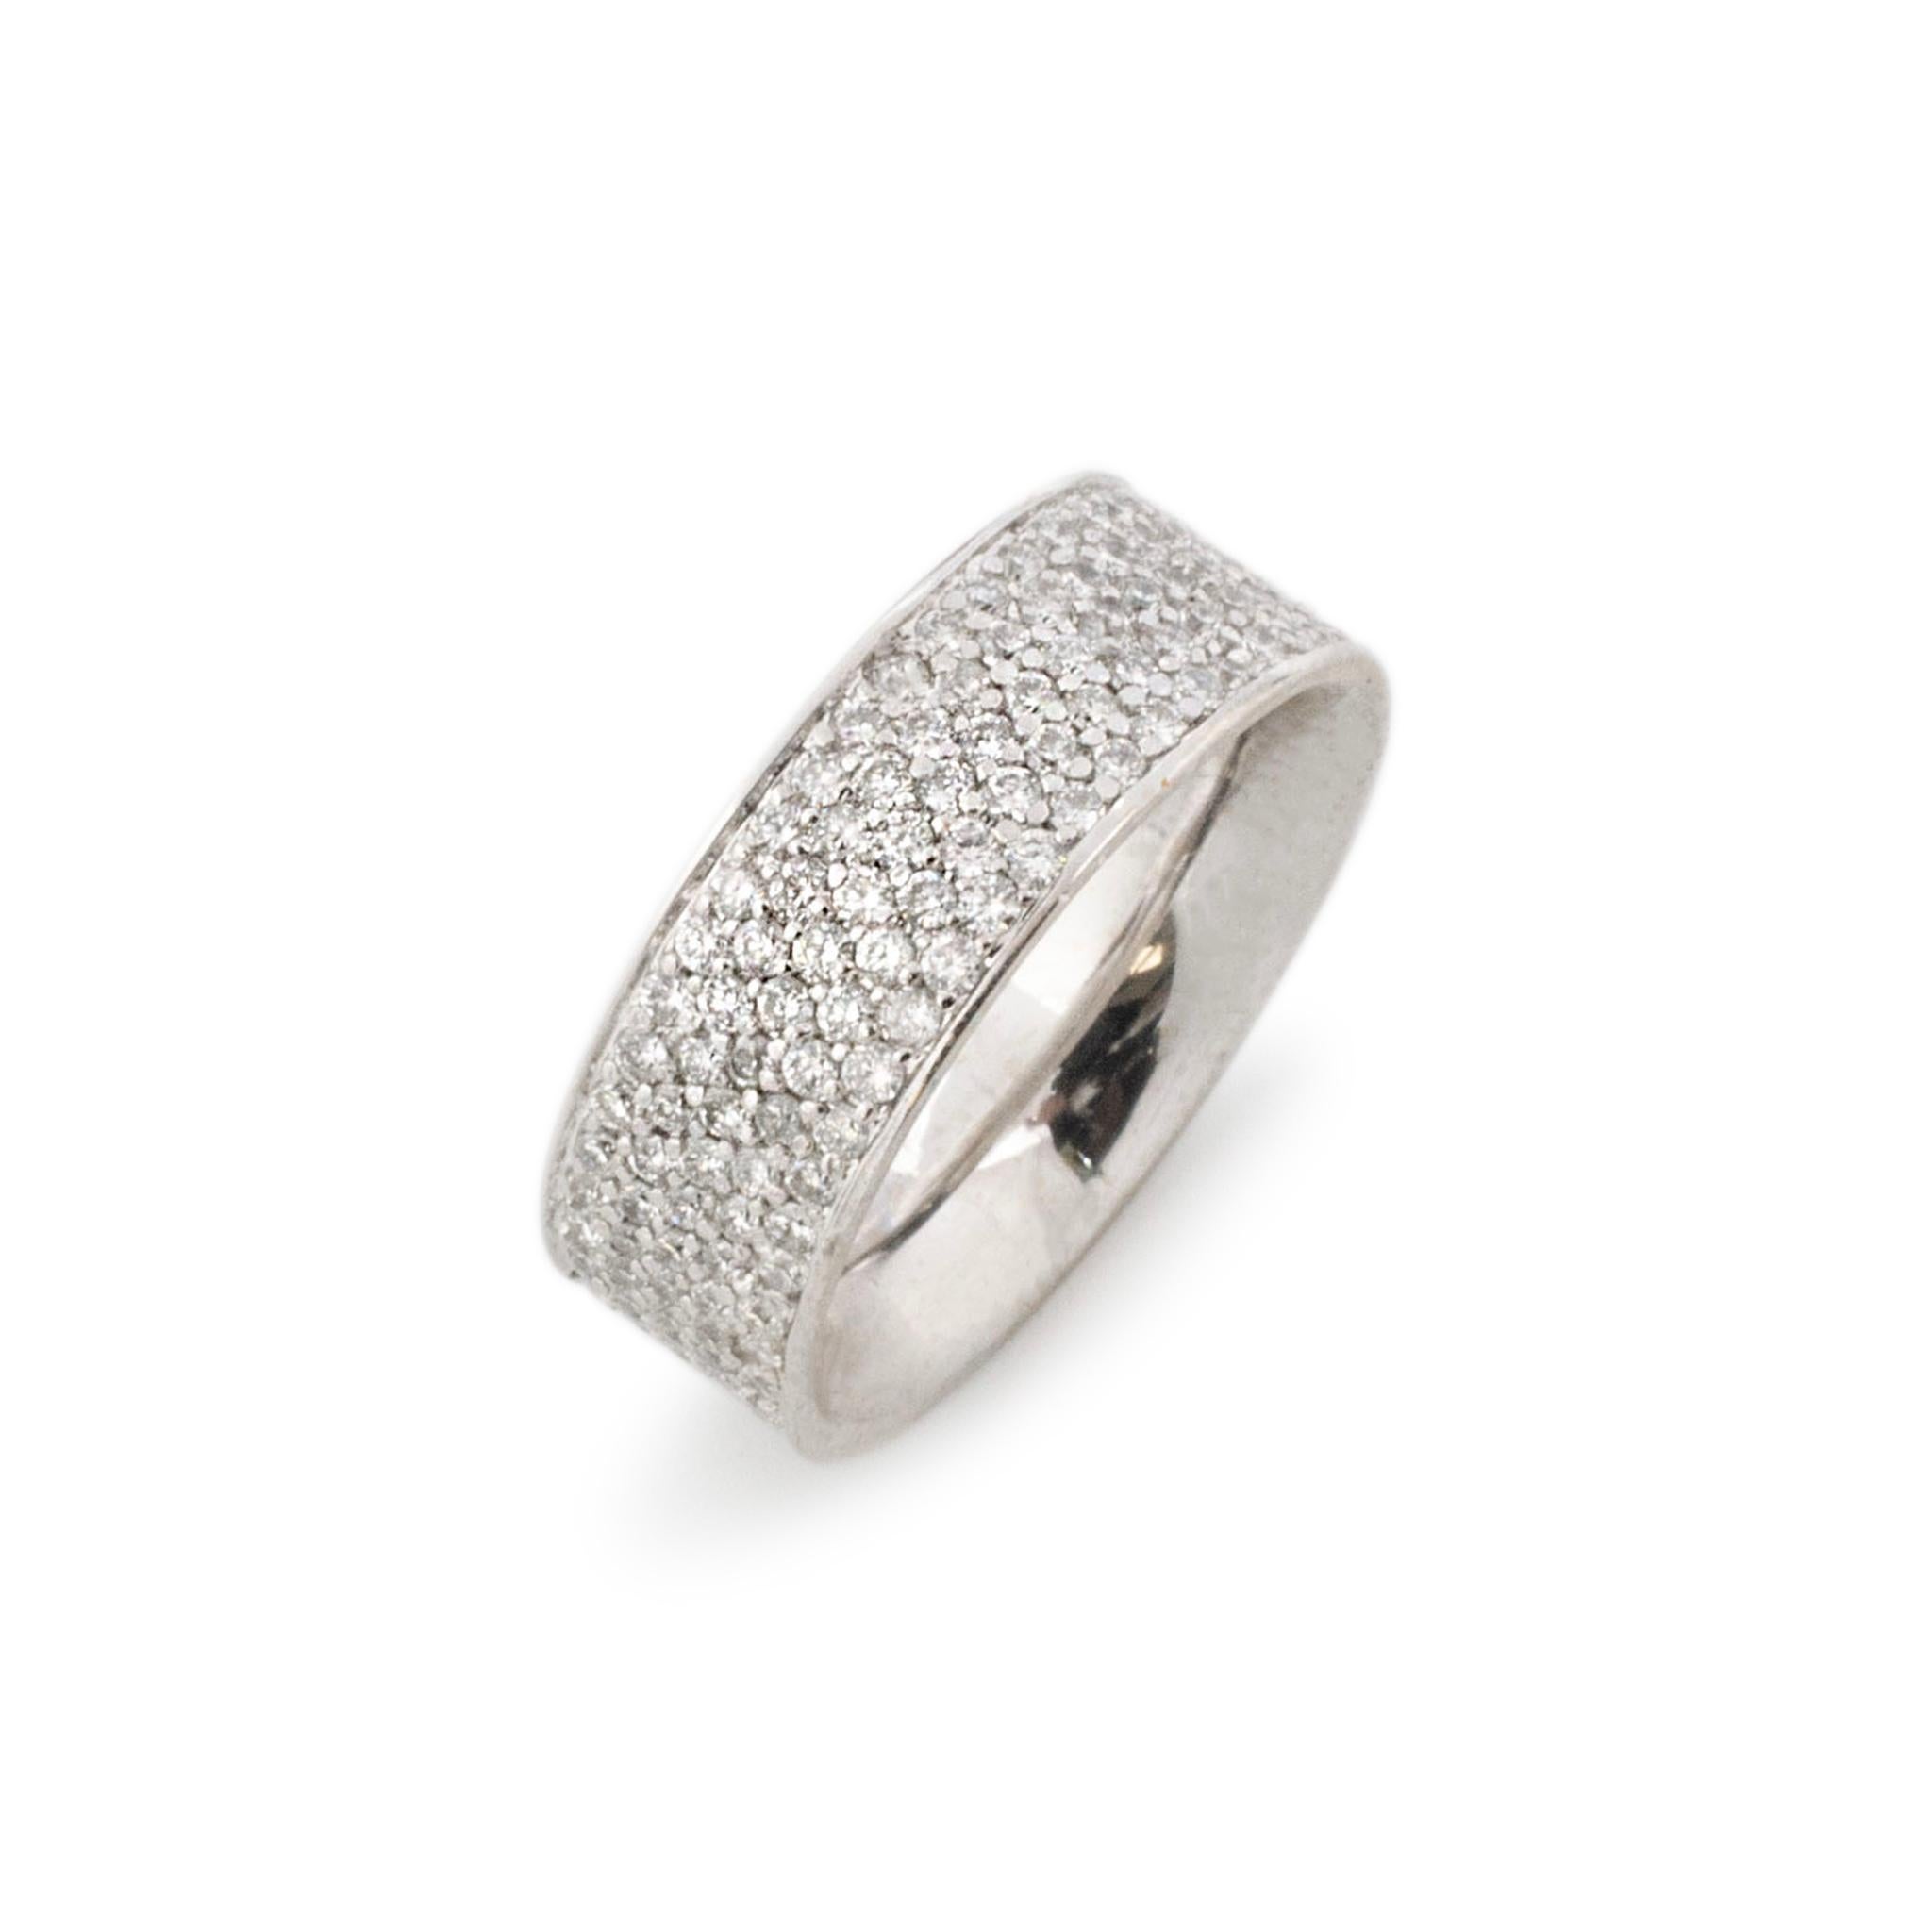 Gender: Ladies

Metal Type: 18K White Gold

Size: 6.5

Shank Maximum Width: 7.60 mm

Weight: 9.02 grams

Ladies 18K white gold diamond cluster eternity wedding band with a comfort-fit shank.  Engraved with 